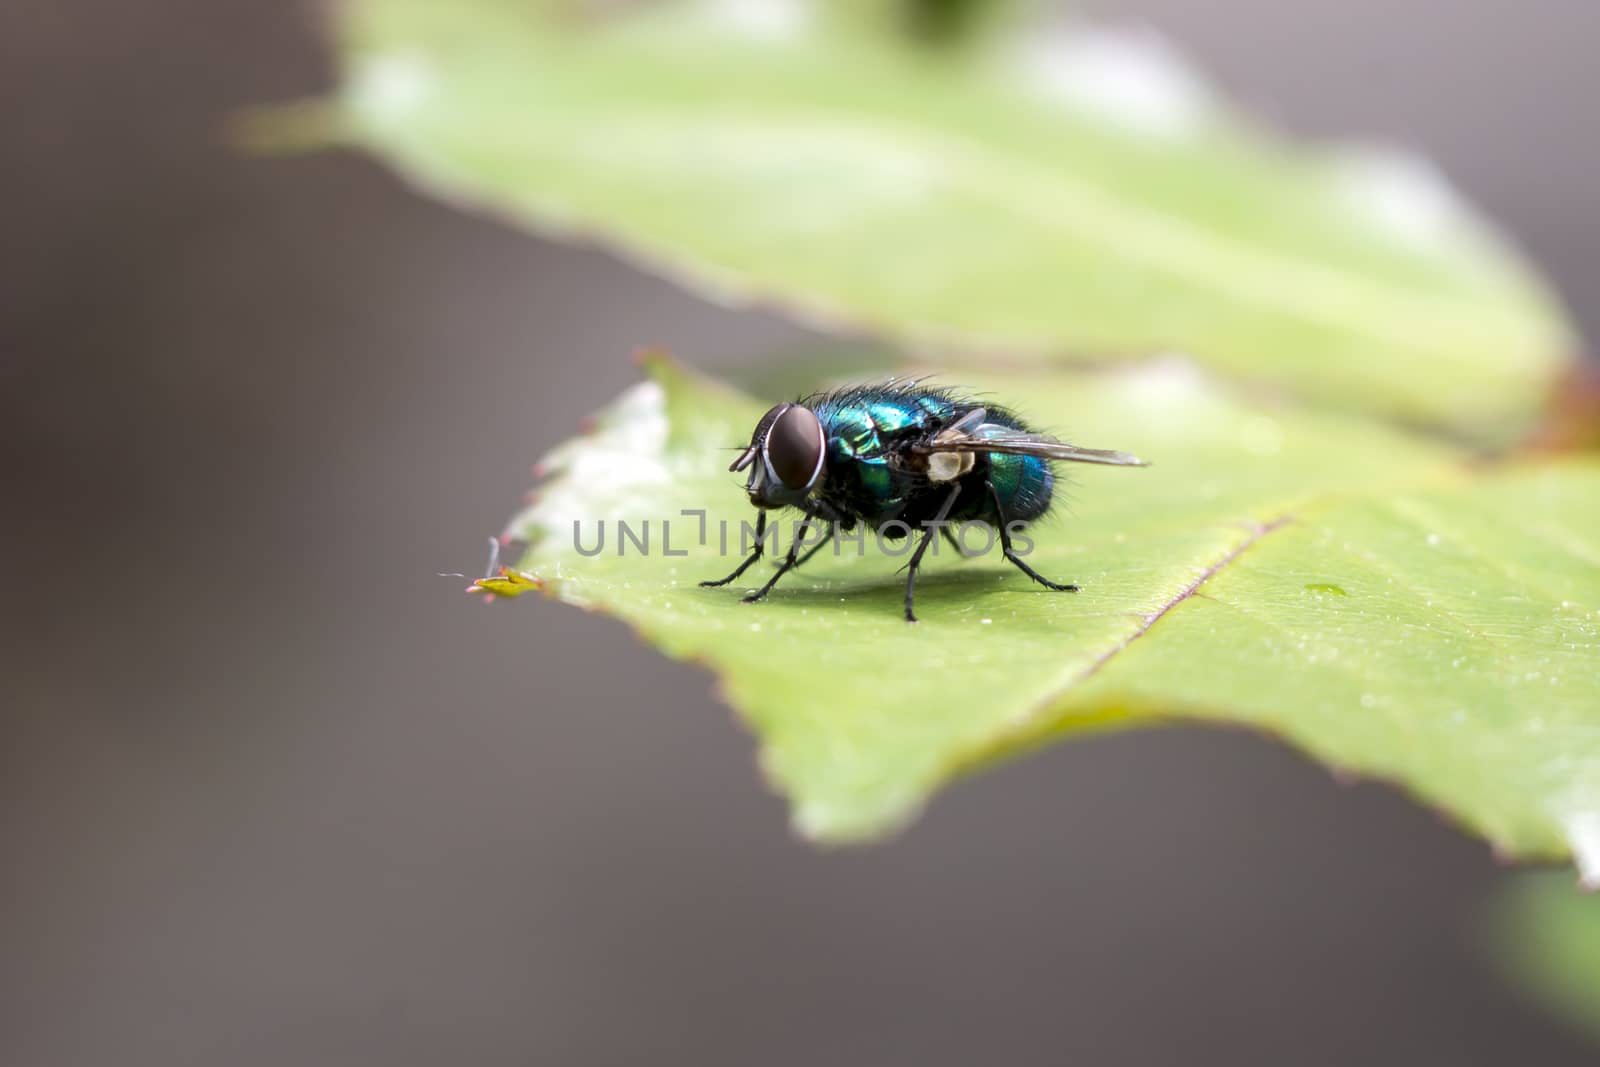 The housefly (Musca domestica) rests on the leaf.